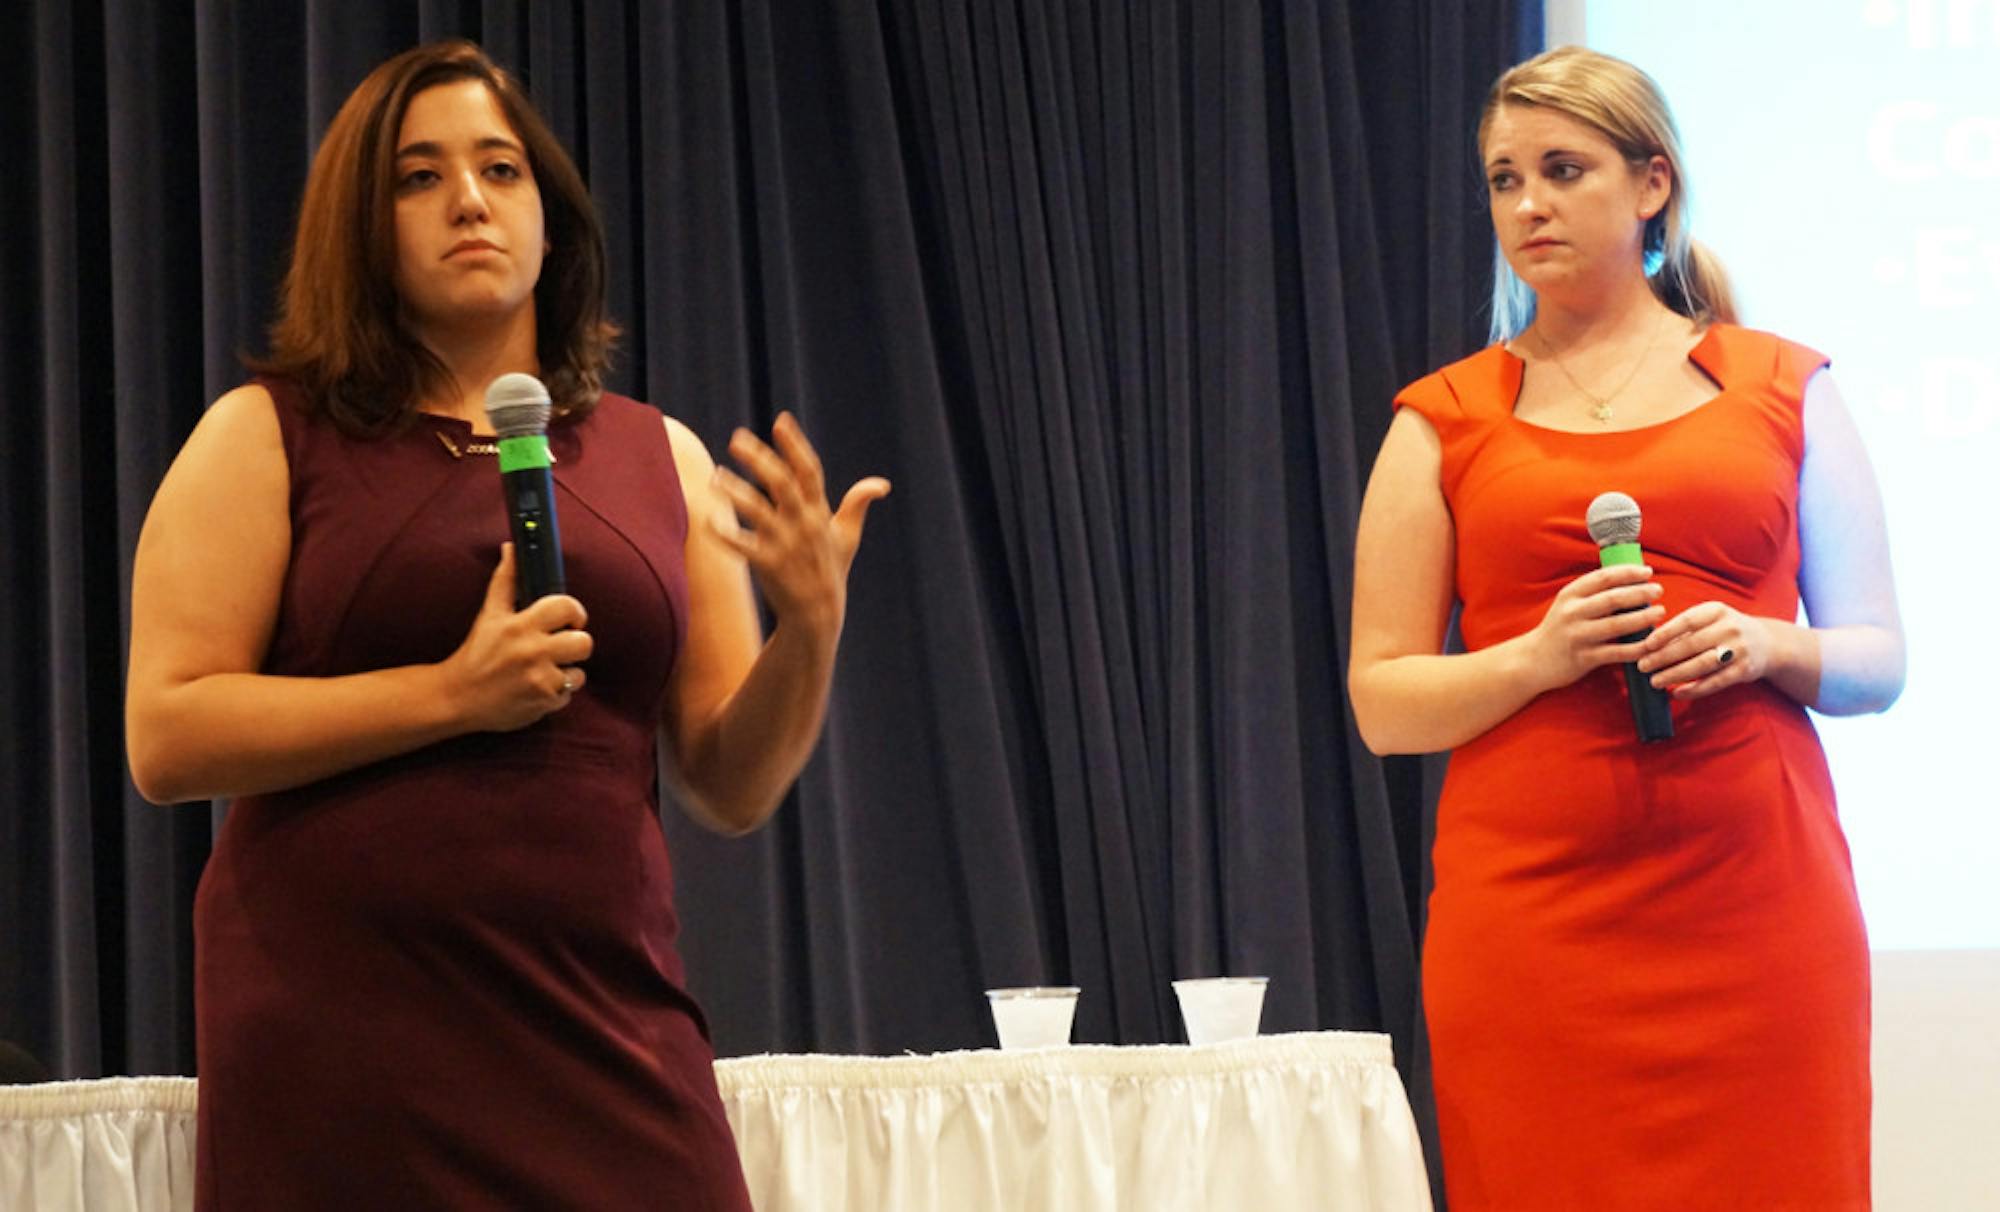 Sexual assault activists Andrea Pino, left, and Annie Clark, who were featured in “The Hunting Ground,” speak at a Sept. 11 event at Legends. The film explores ‘rape culture’ that students still try to understand and fight.